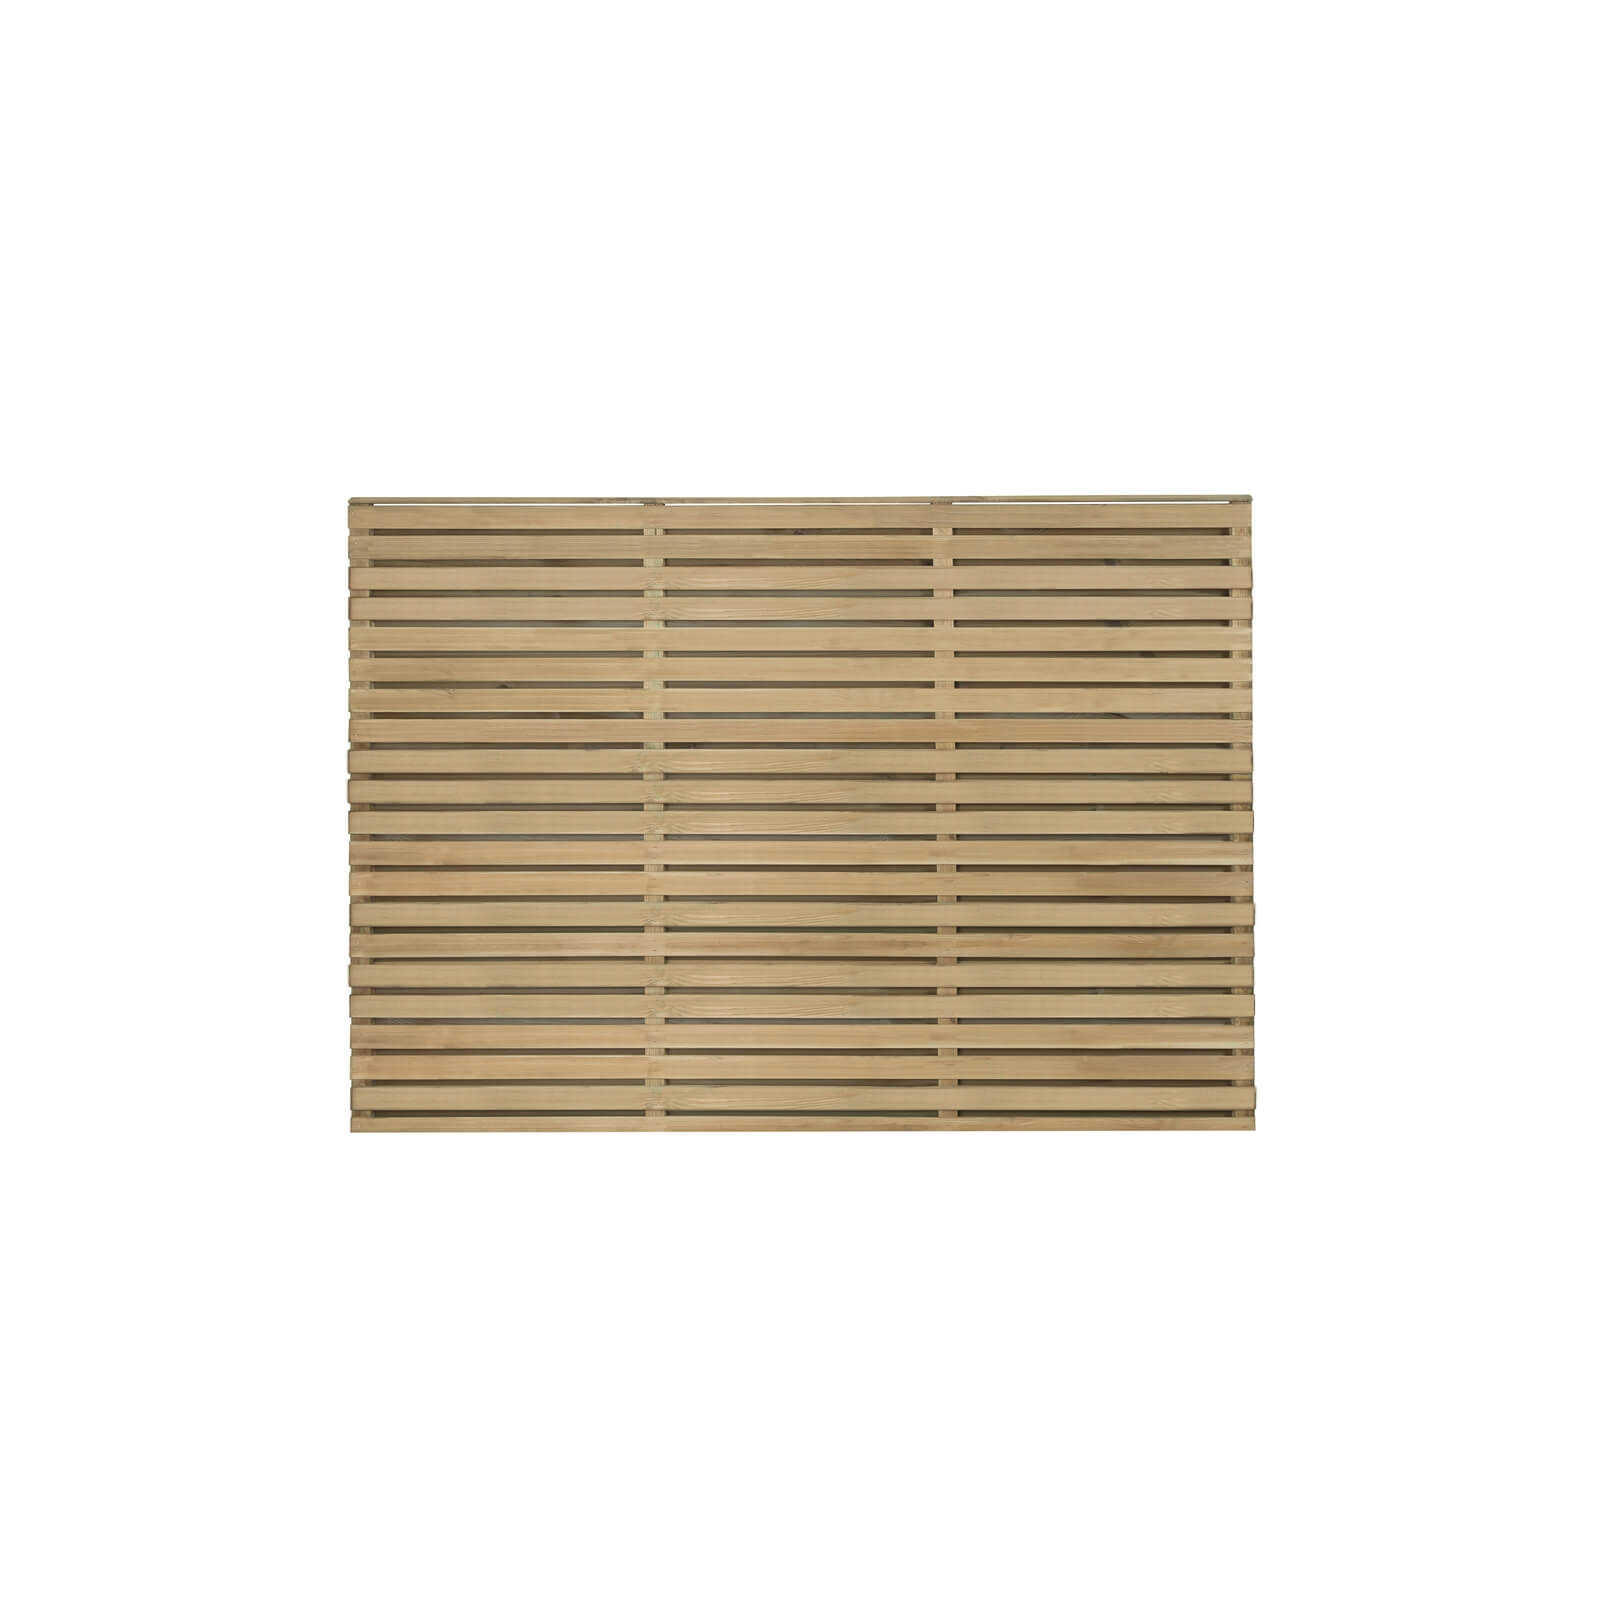 6ft x 4ft (1.8m x 1.2m) Pressure Treated Contemporary Double Slatted Fence Panel - Pack of 5